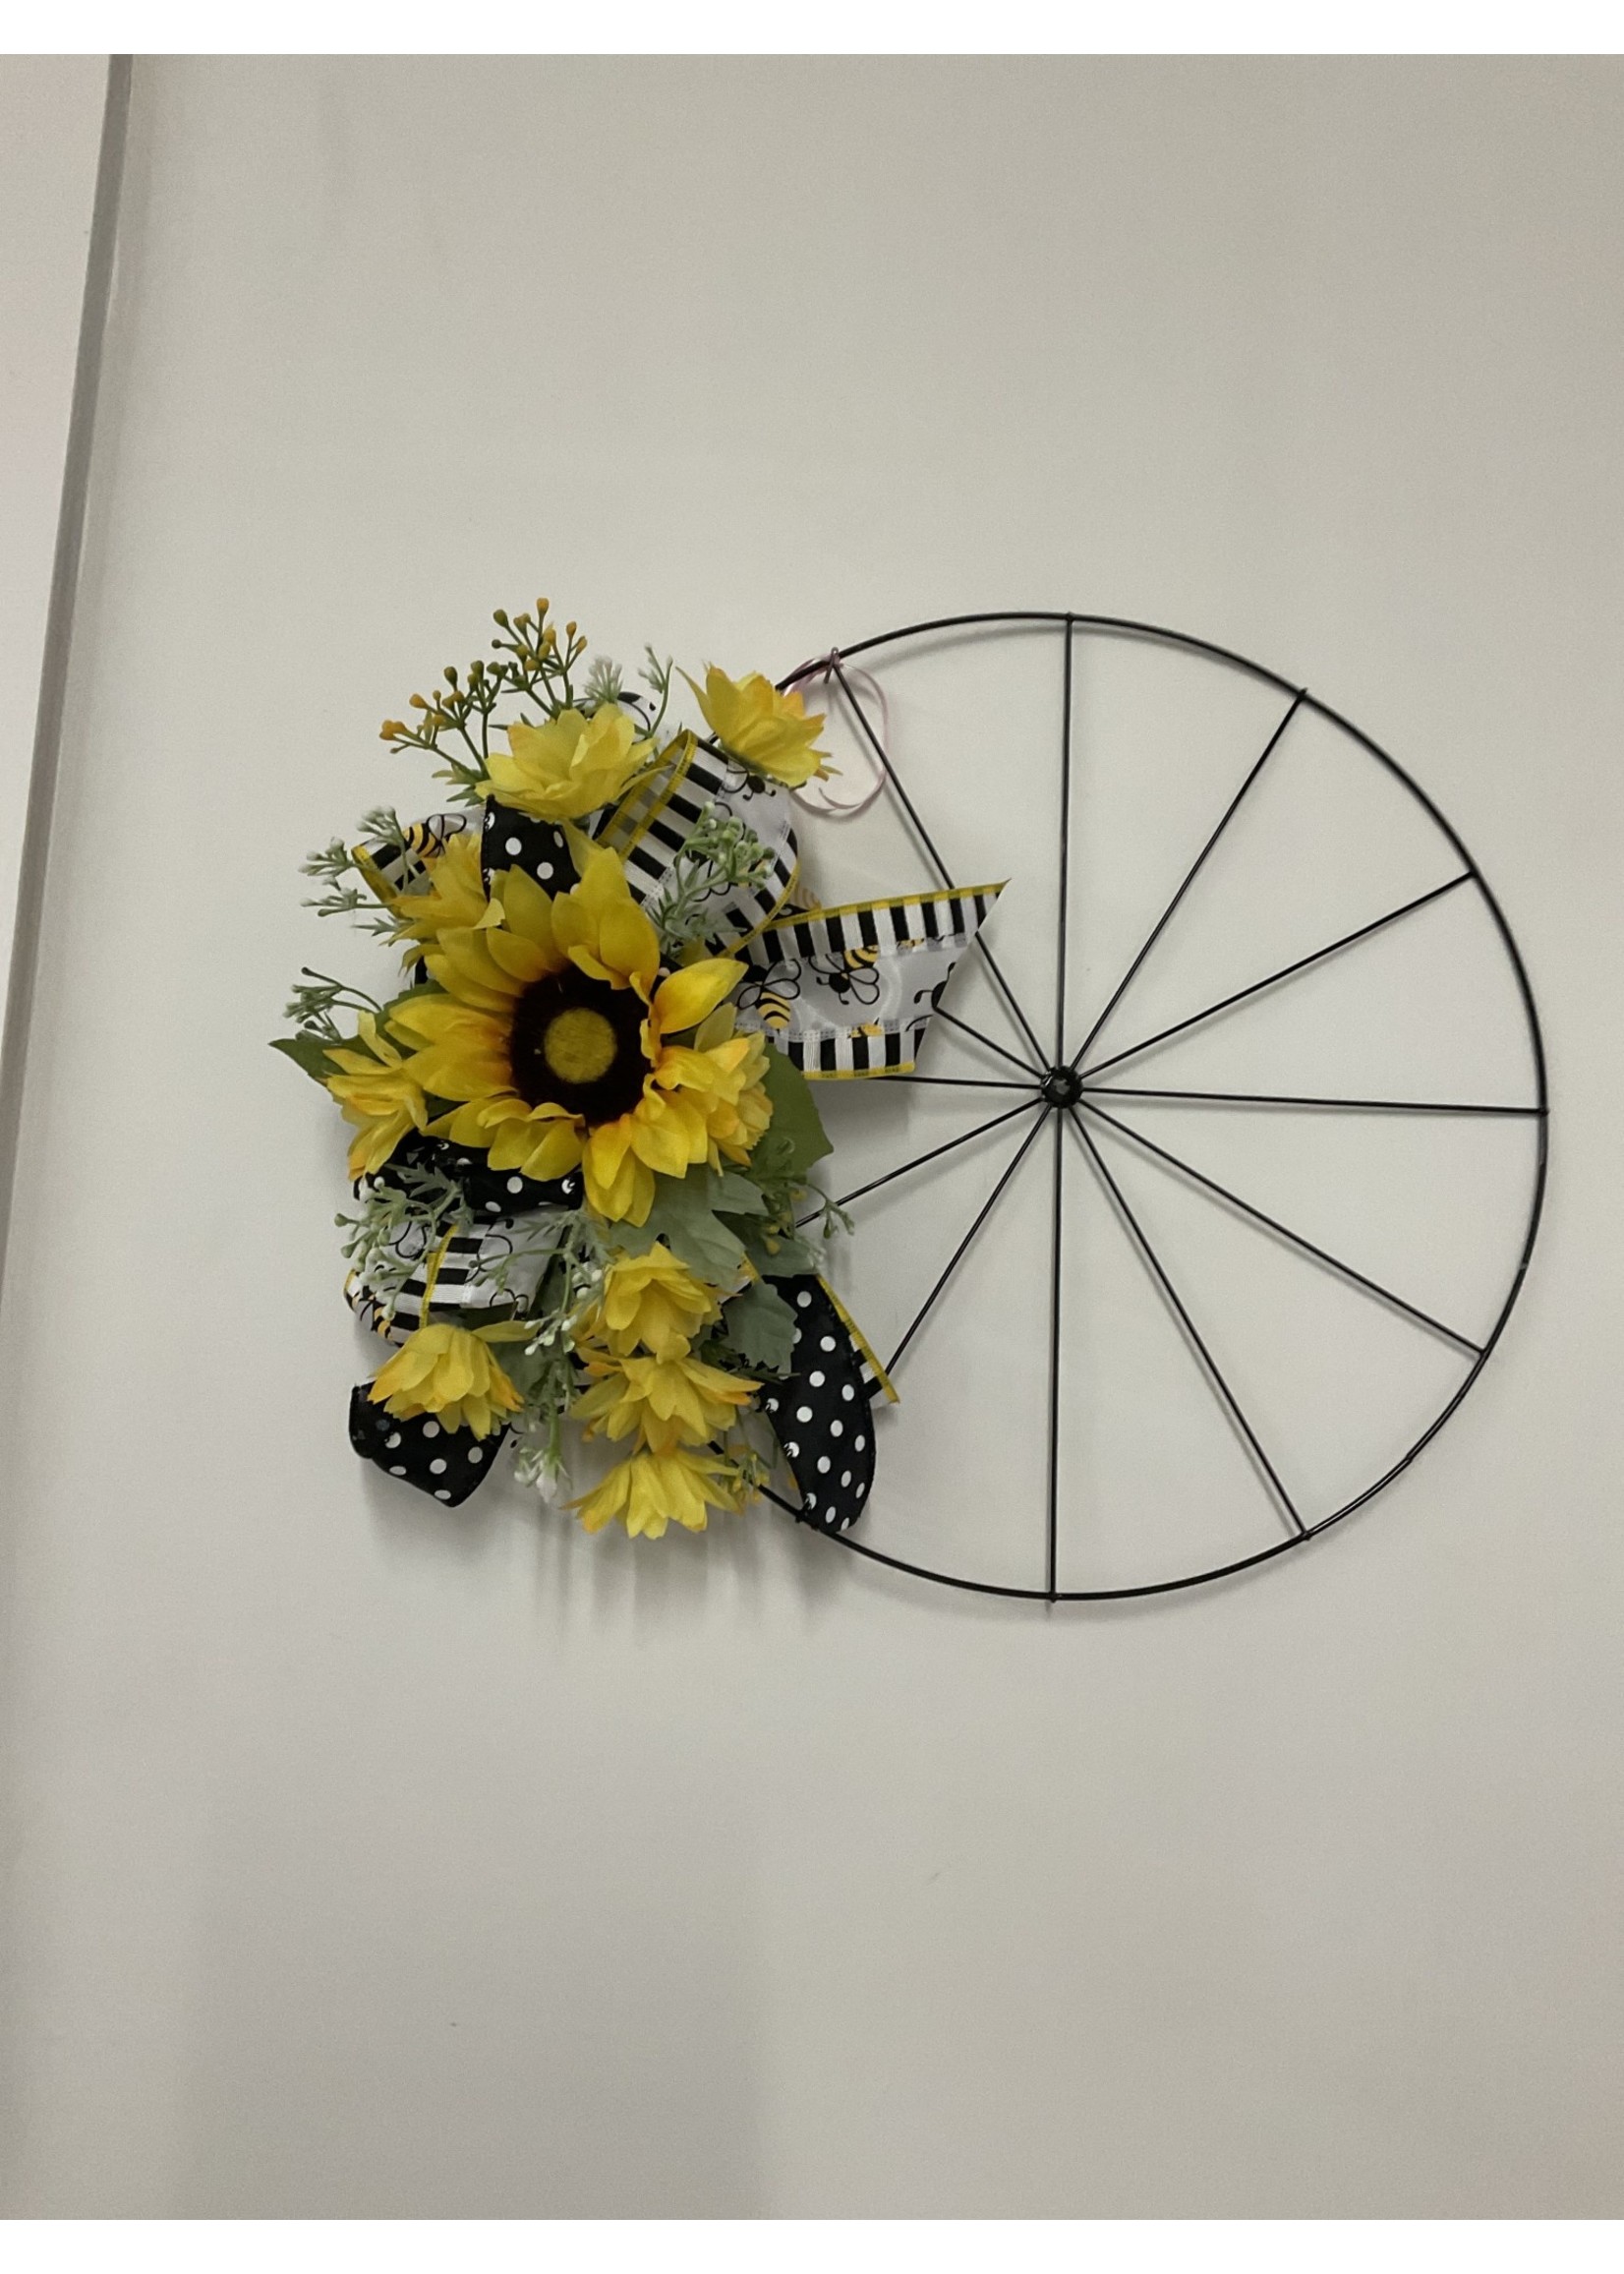 My New Favorite Thing Wreath Bicycle 18 in-Yellow Sunflowers and Black Striped and Polka Dot Ribbon